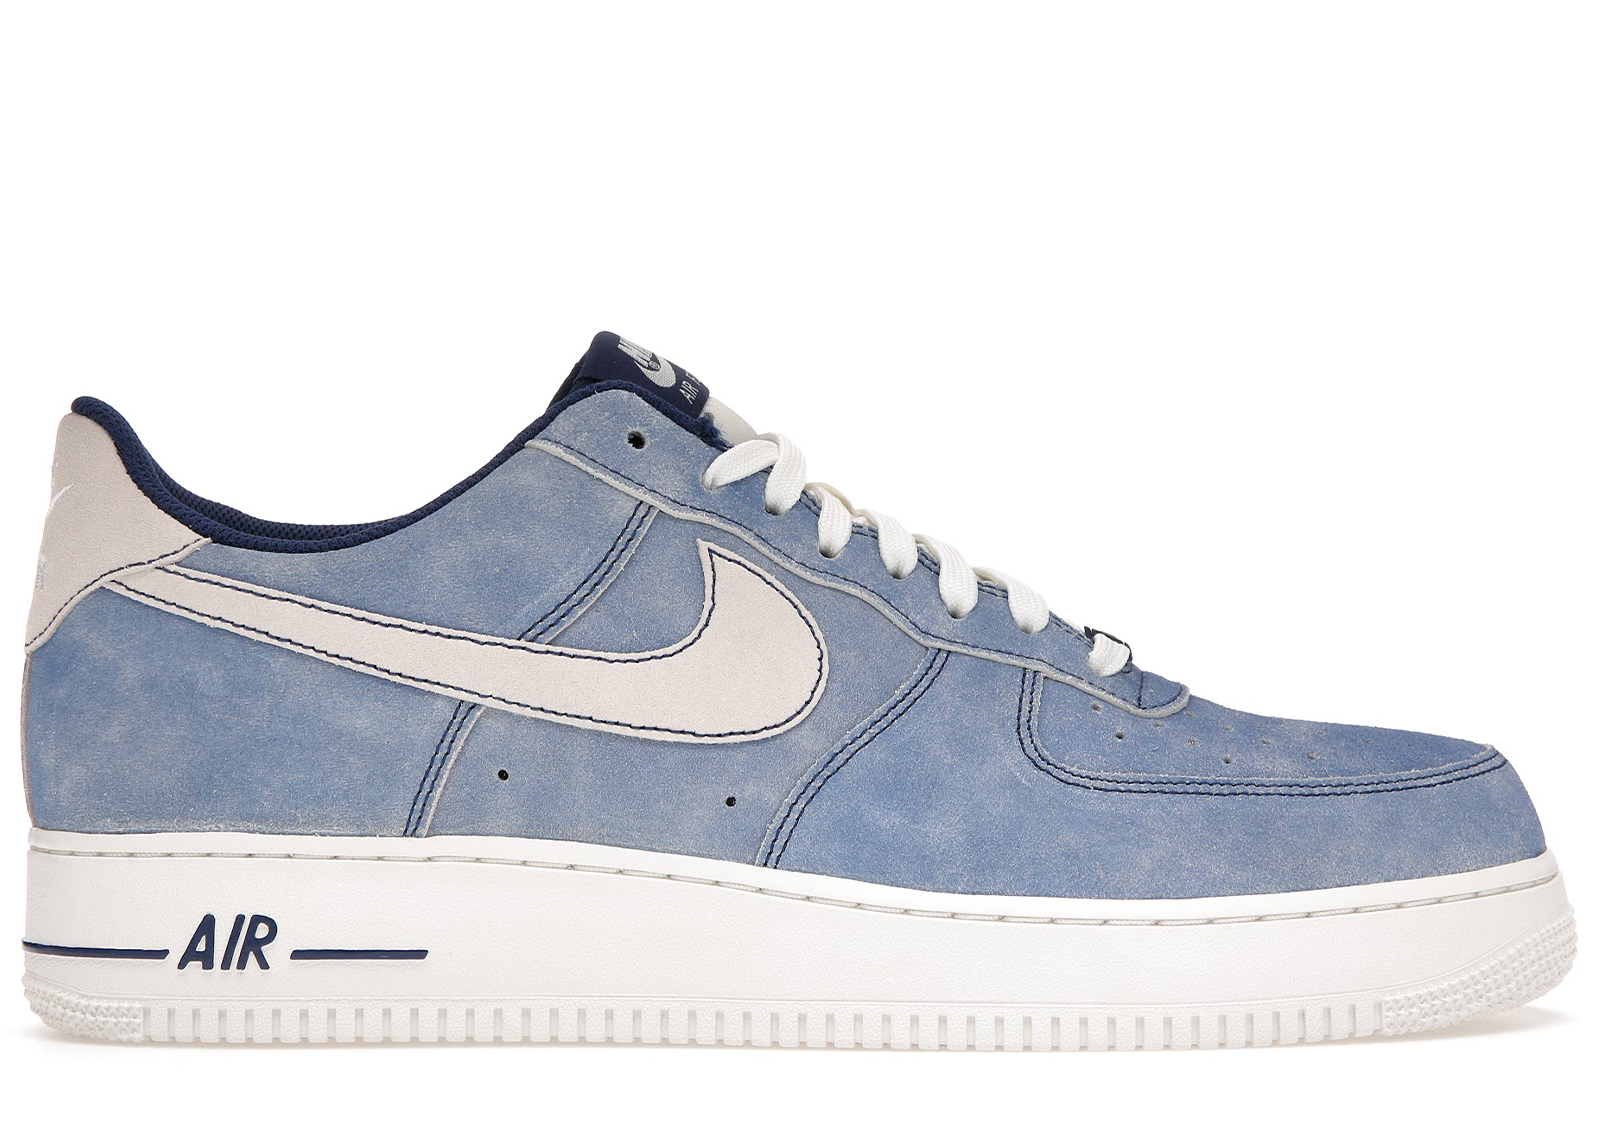 nike air force 1 suede royal blue